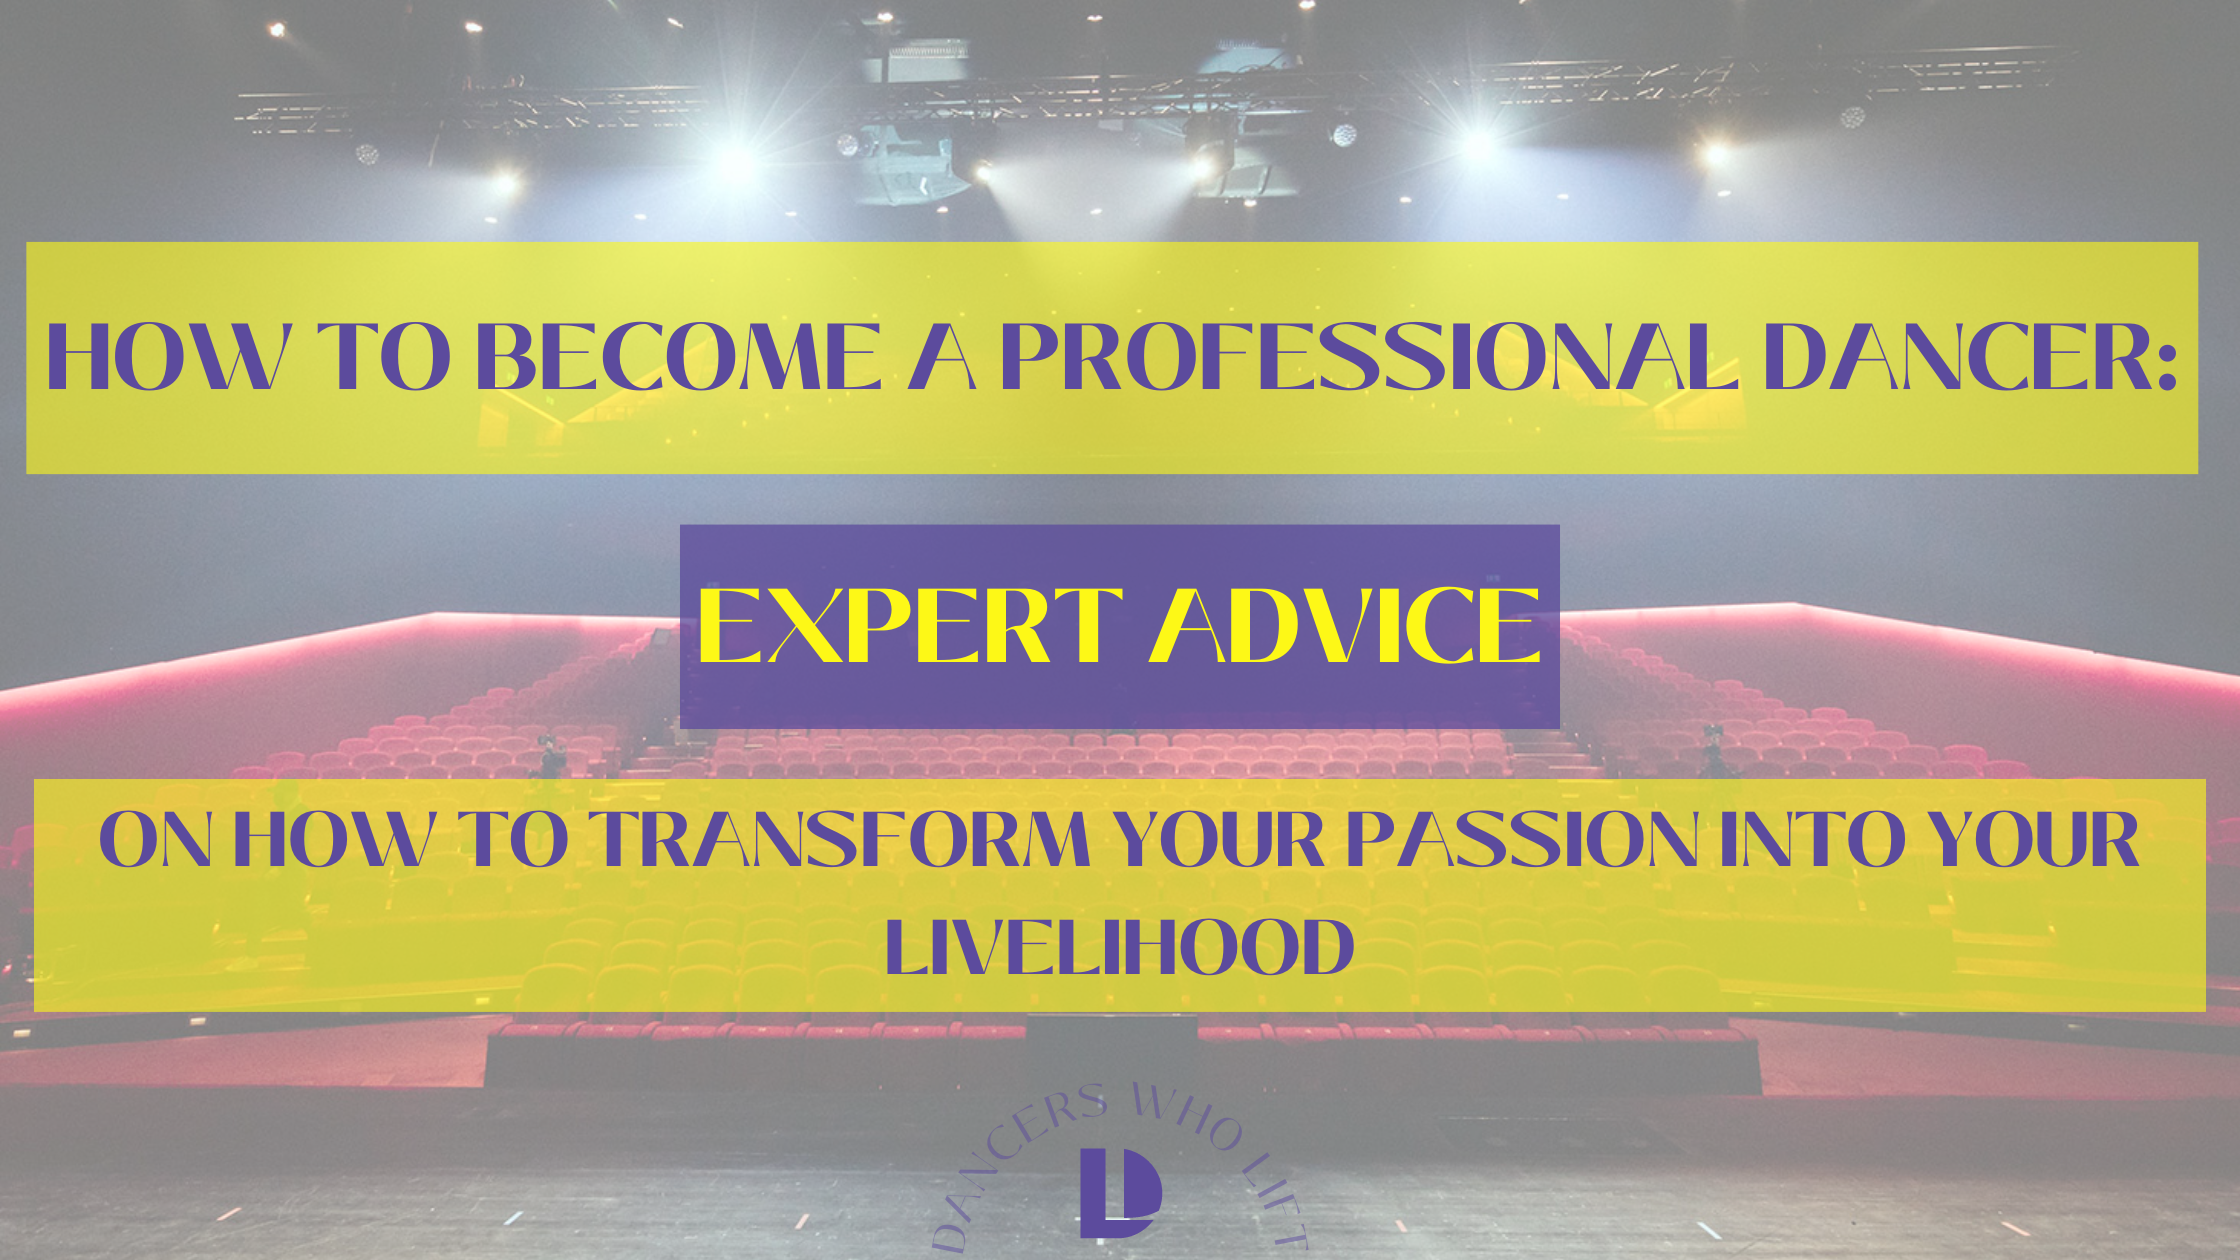 How to become a professional dancer